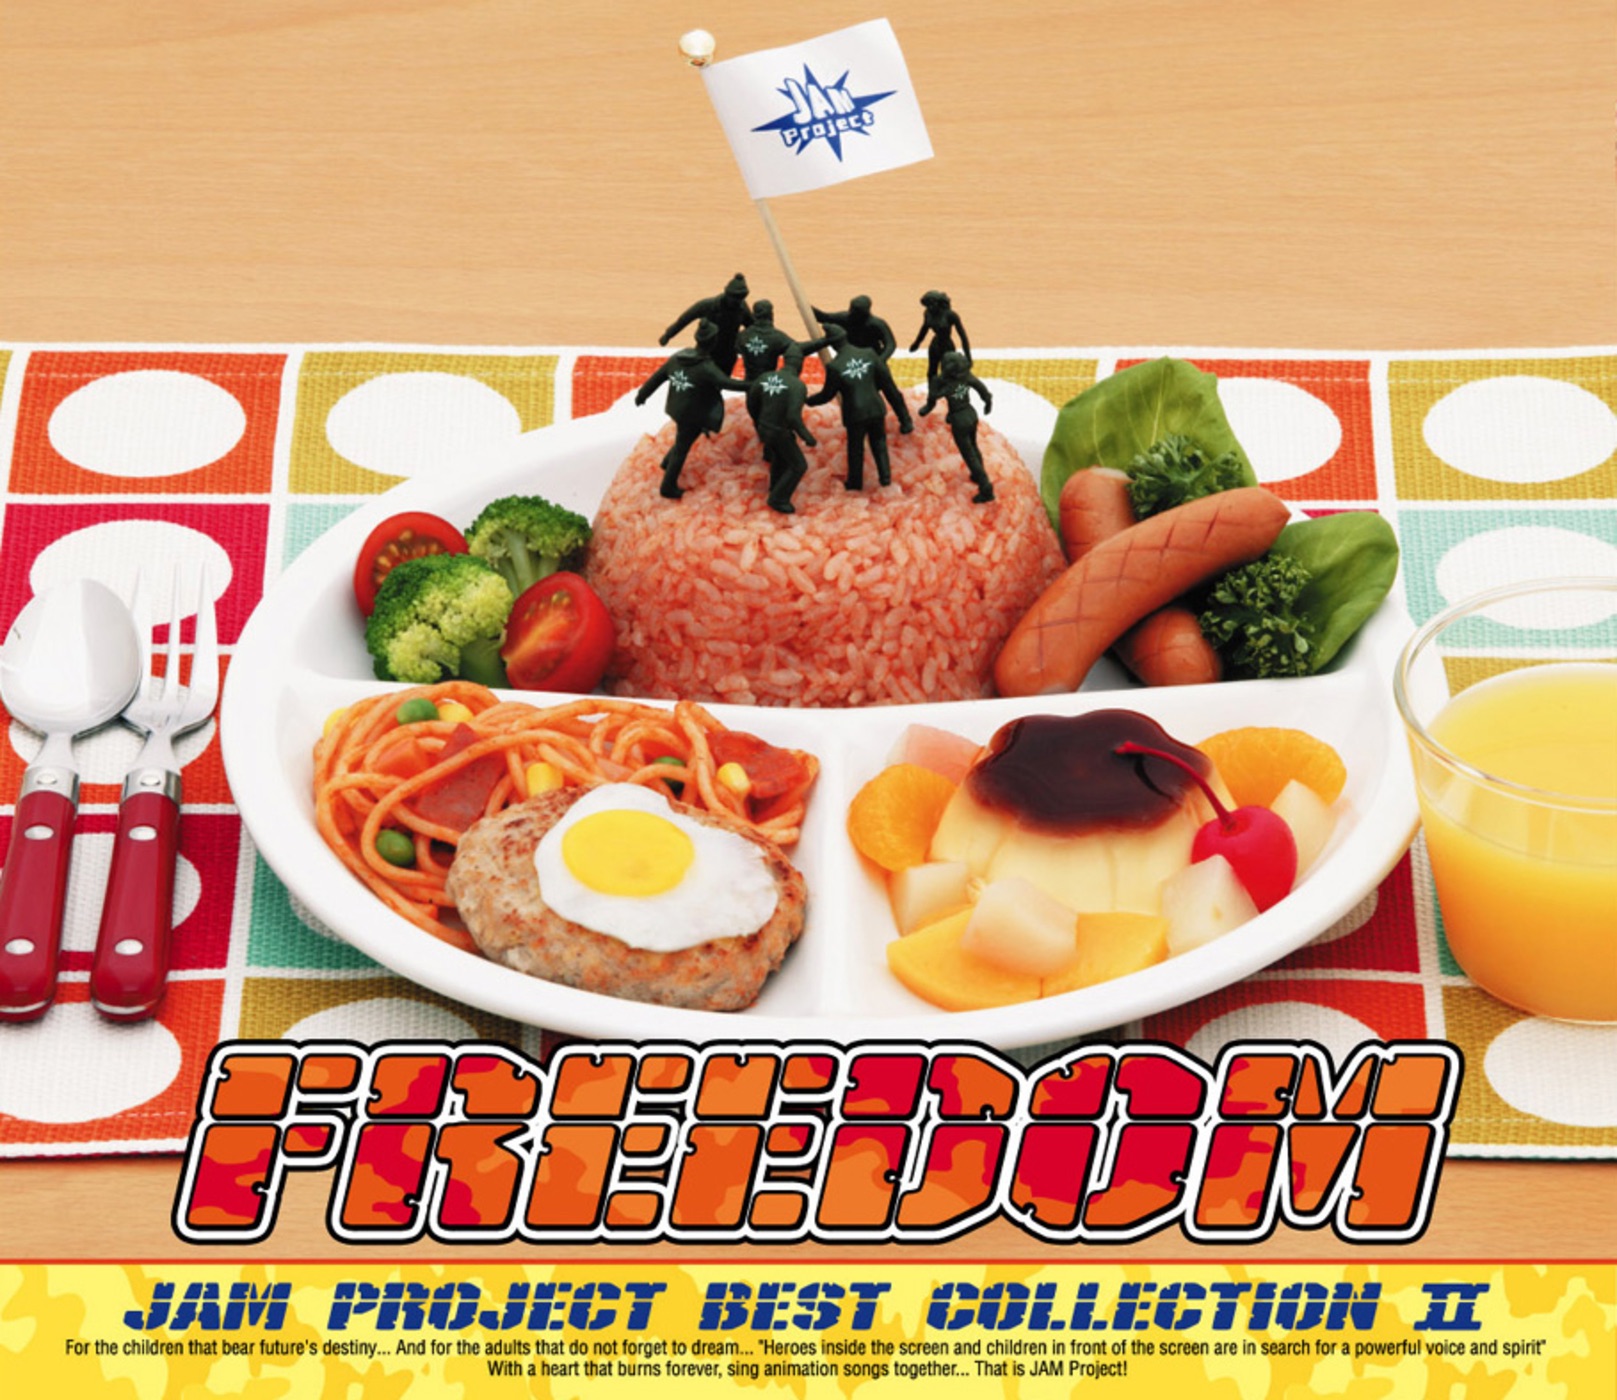 Best collection 2. 夢スケッチ Jam Project. Project Freedom. 2003 Jam crcation.